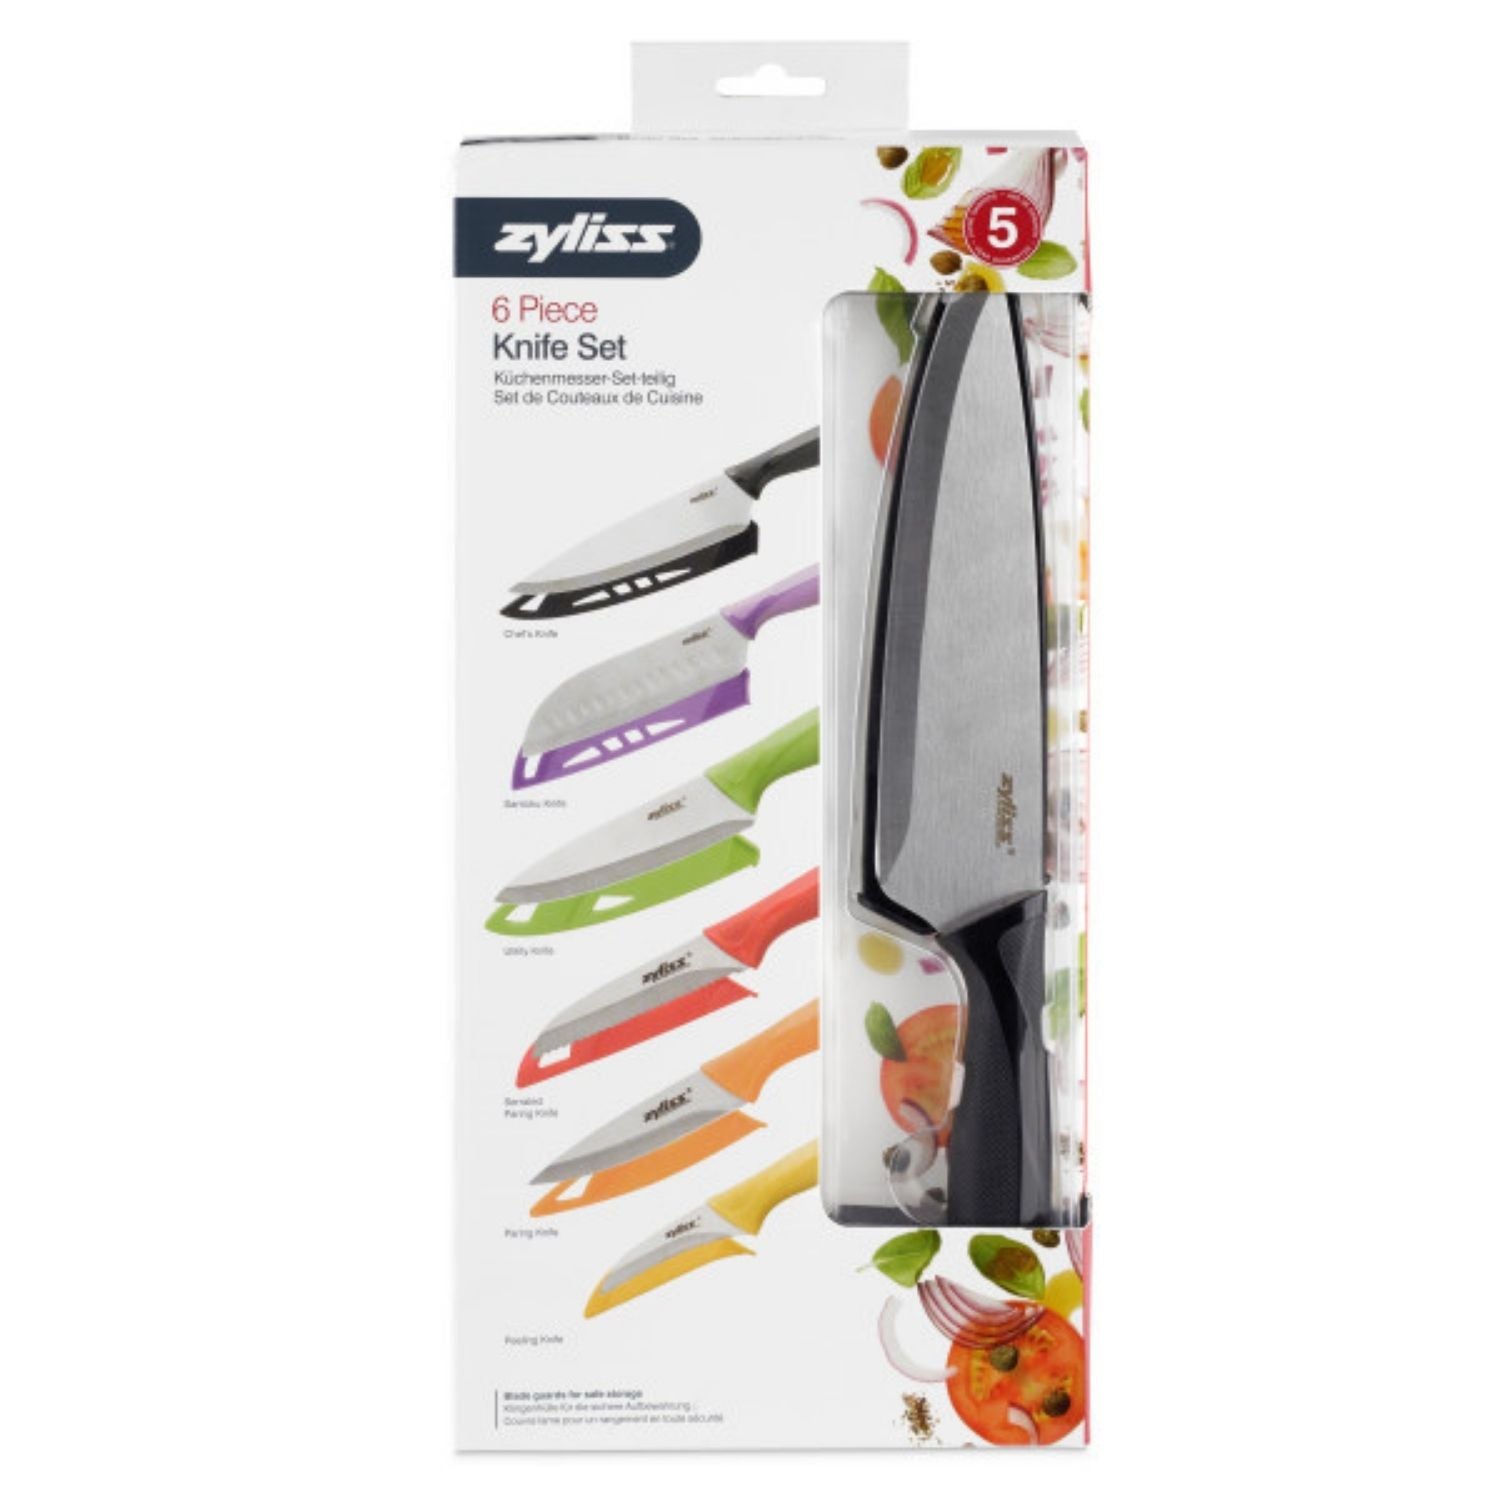 Zyliss 6 Piece Knife Set 2 Shaws Department Stores